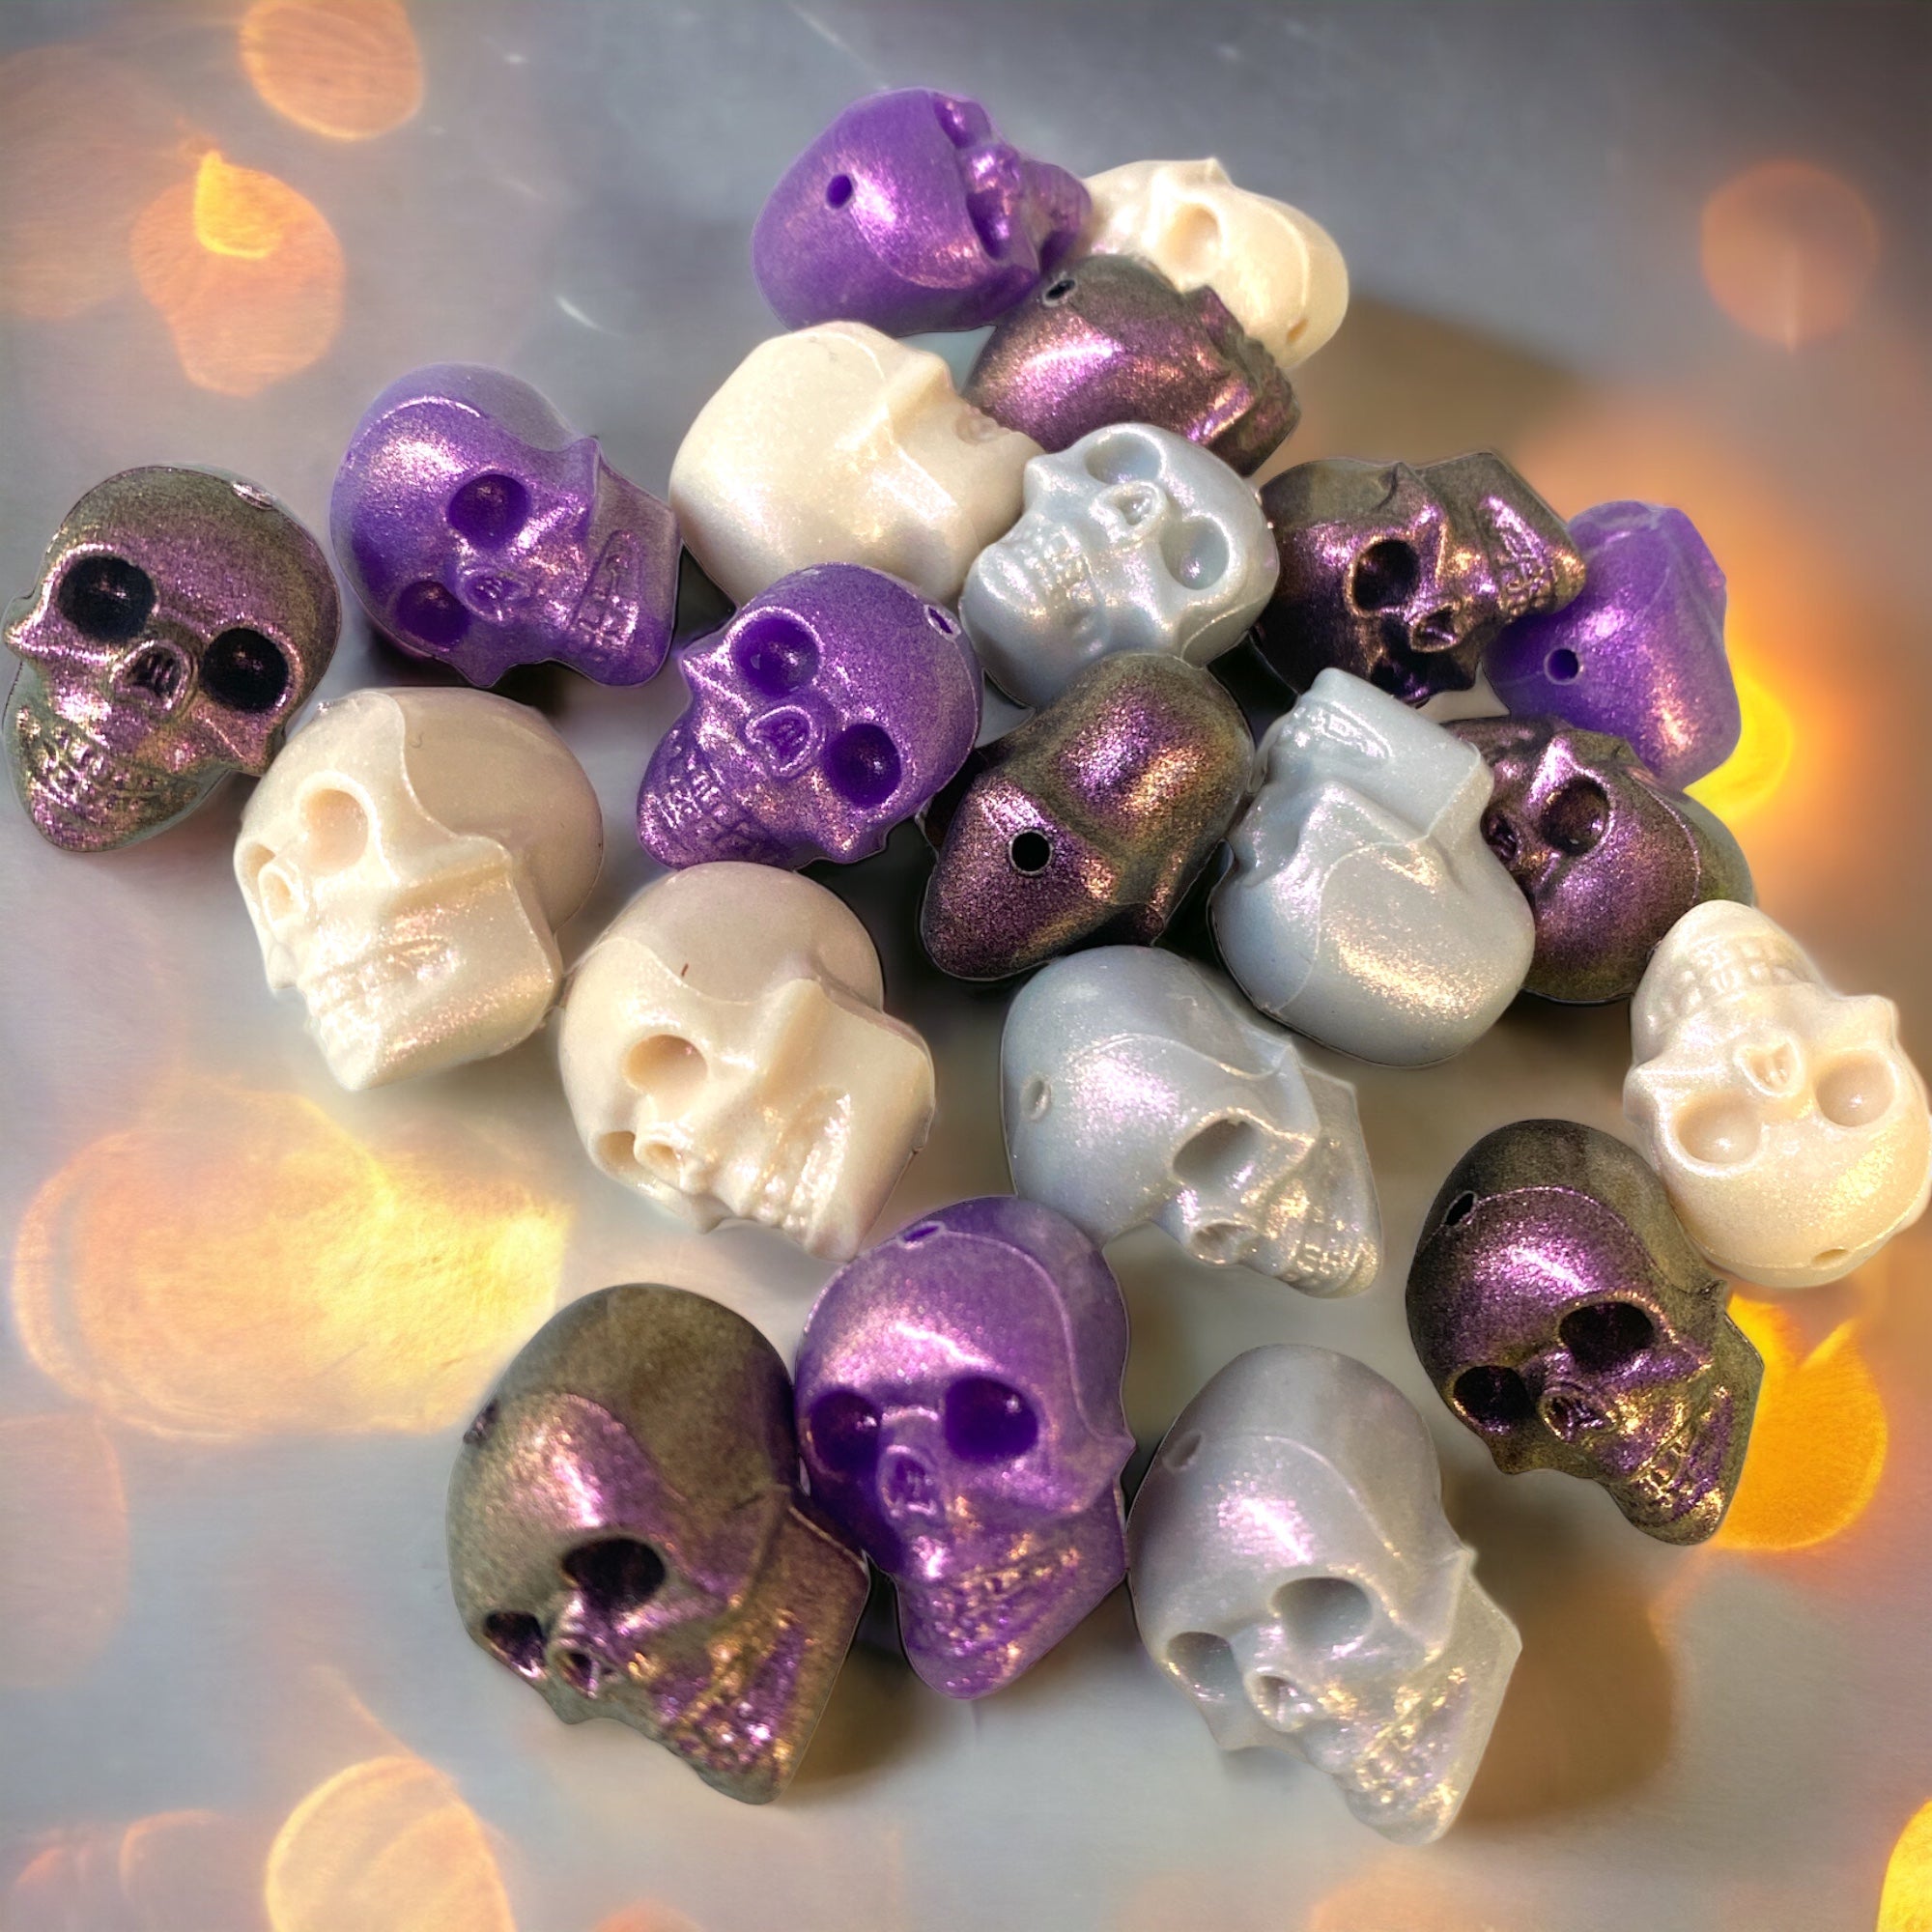 X171- (1 Count) Purple Opal 22mm x 15mm Skull Silicone Focal Bead